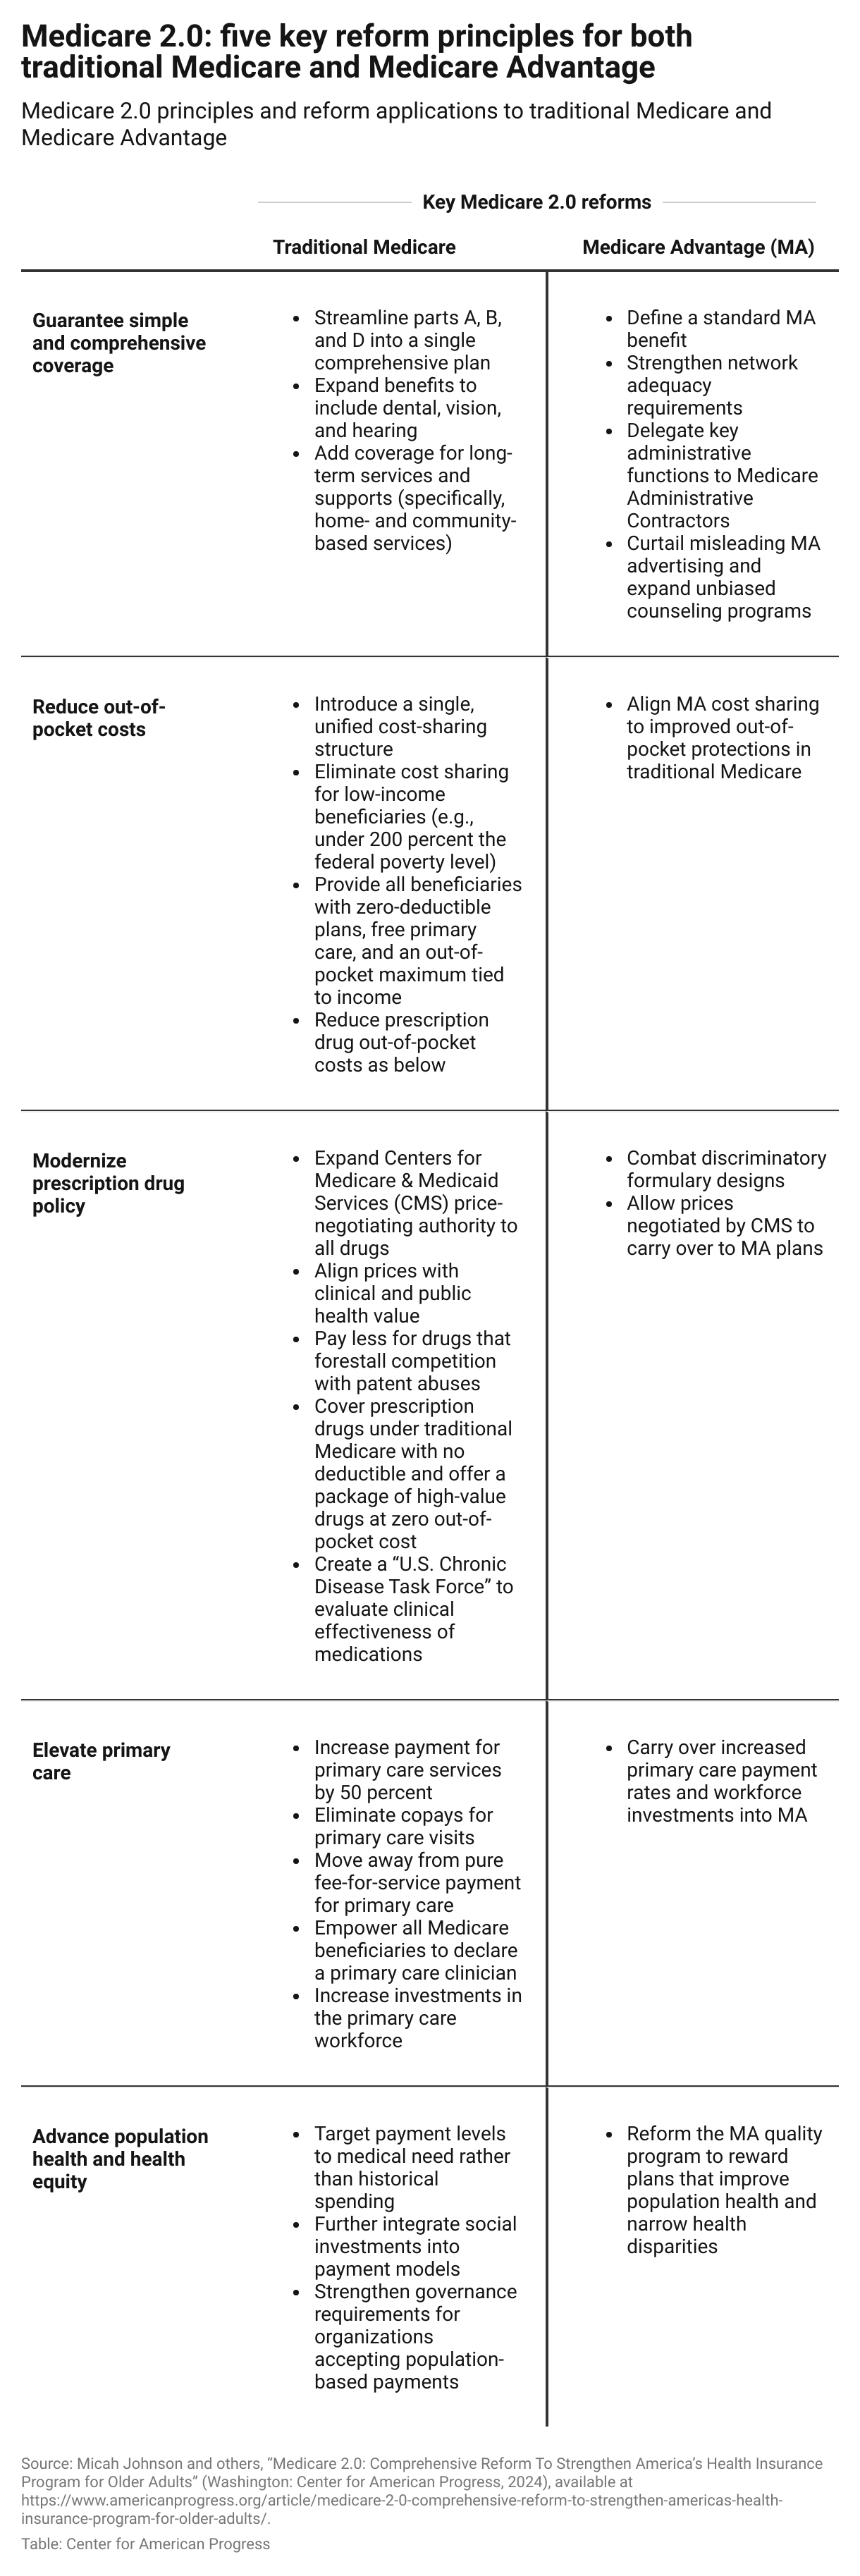 A table showing how the reforms in both traditional Medicare and Medicare Advantage in Medicare 2.0 would align with the five key principles of reform that are outlined in the report.